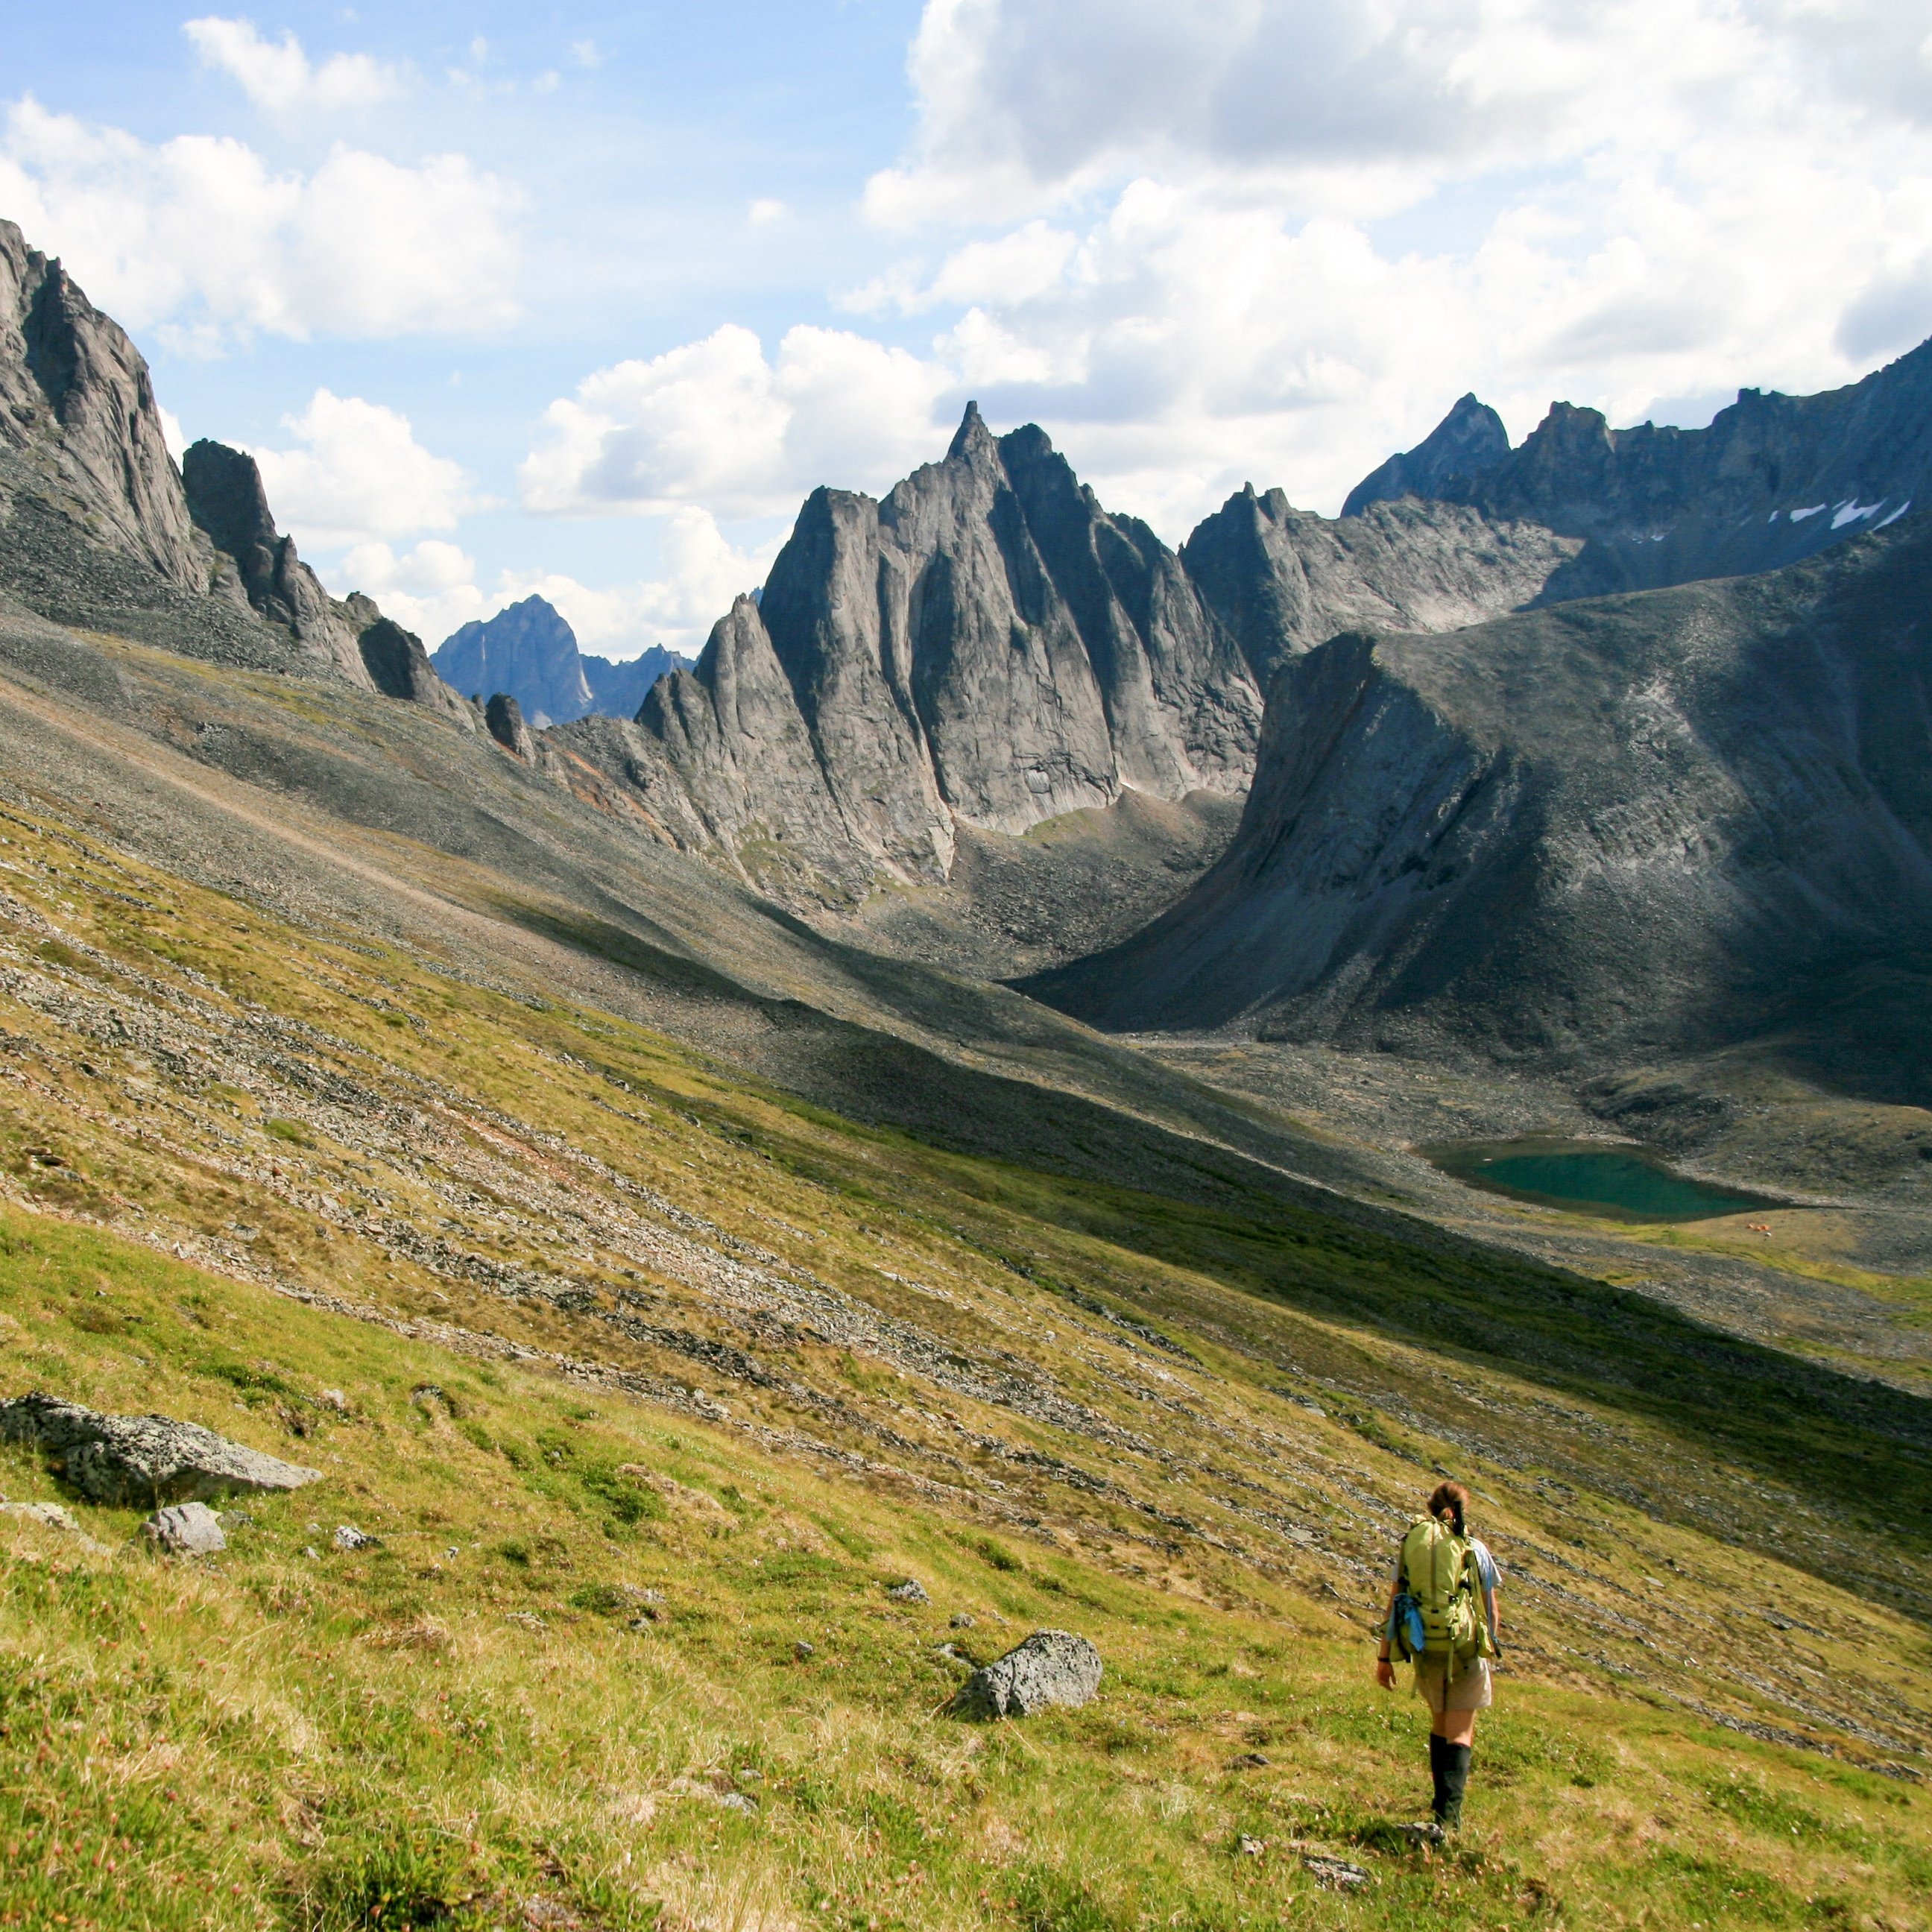 Backpacker hikes through grassy foothills in the Yukon with high, steep peaks in the background